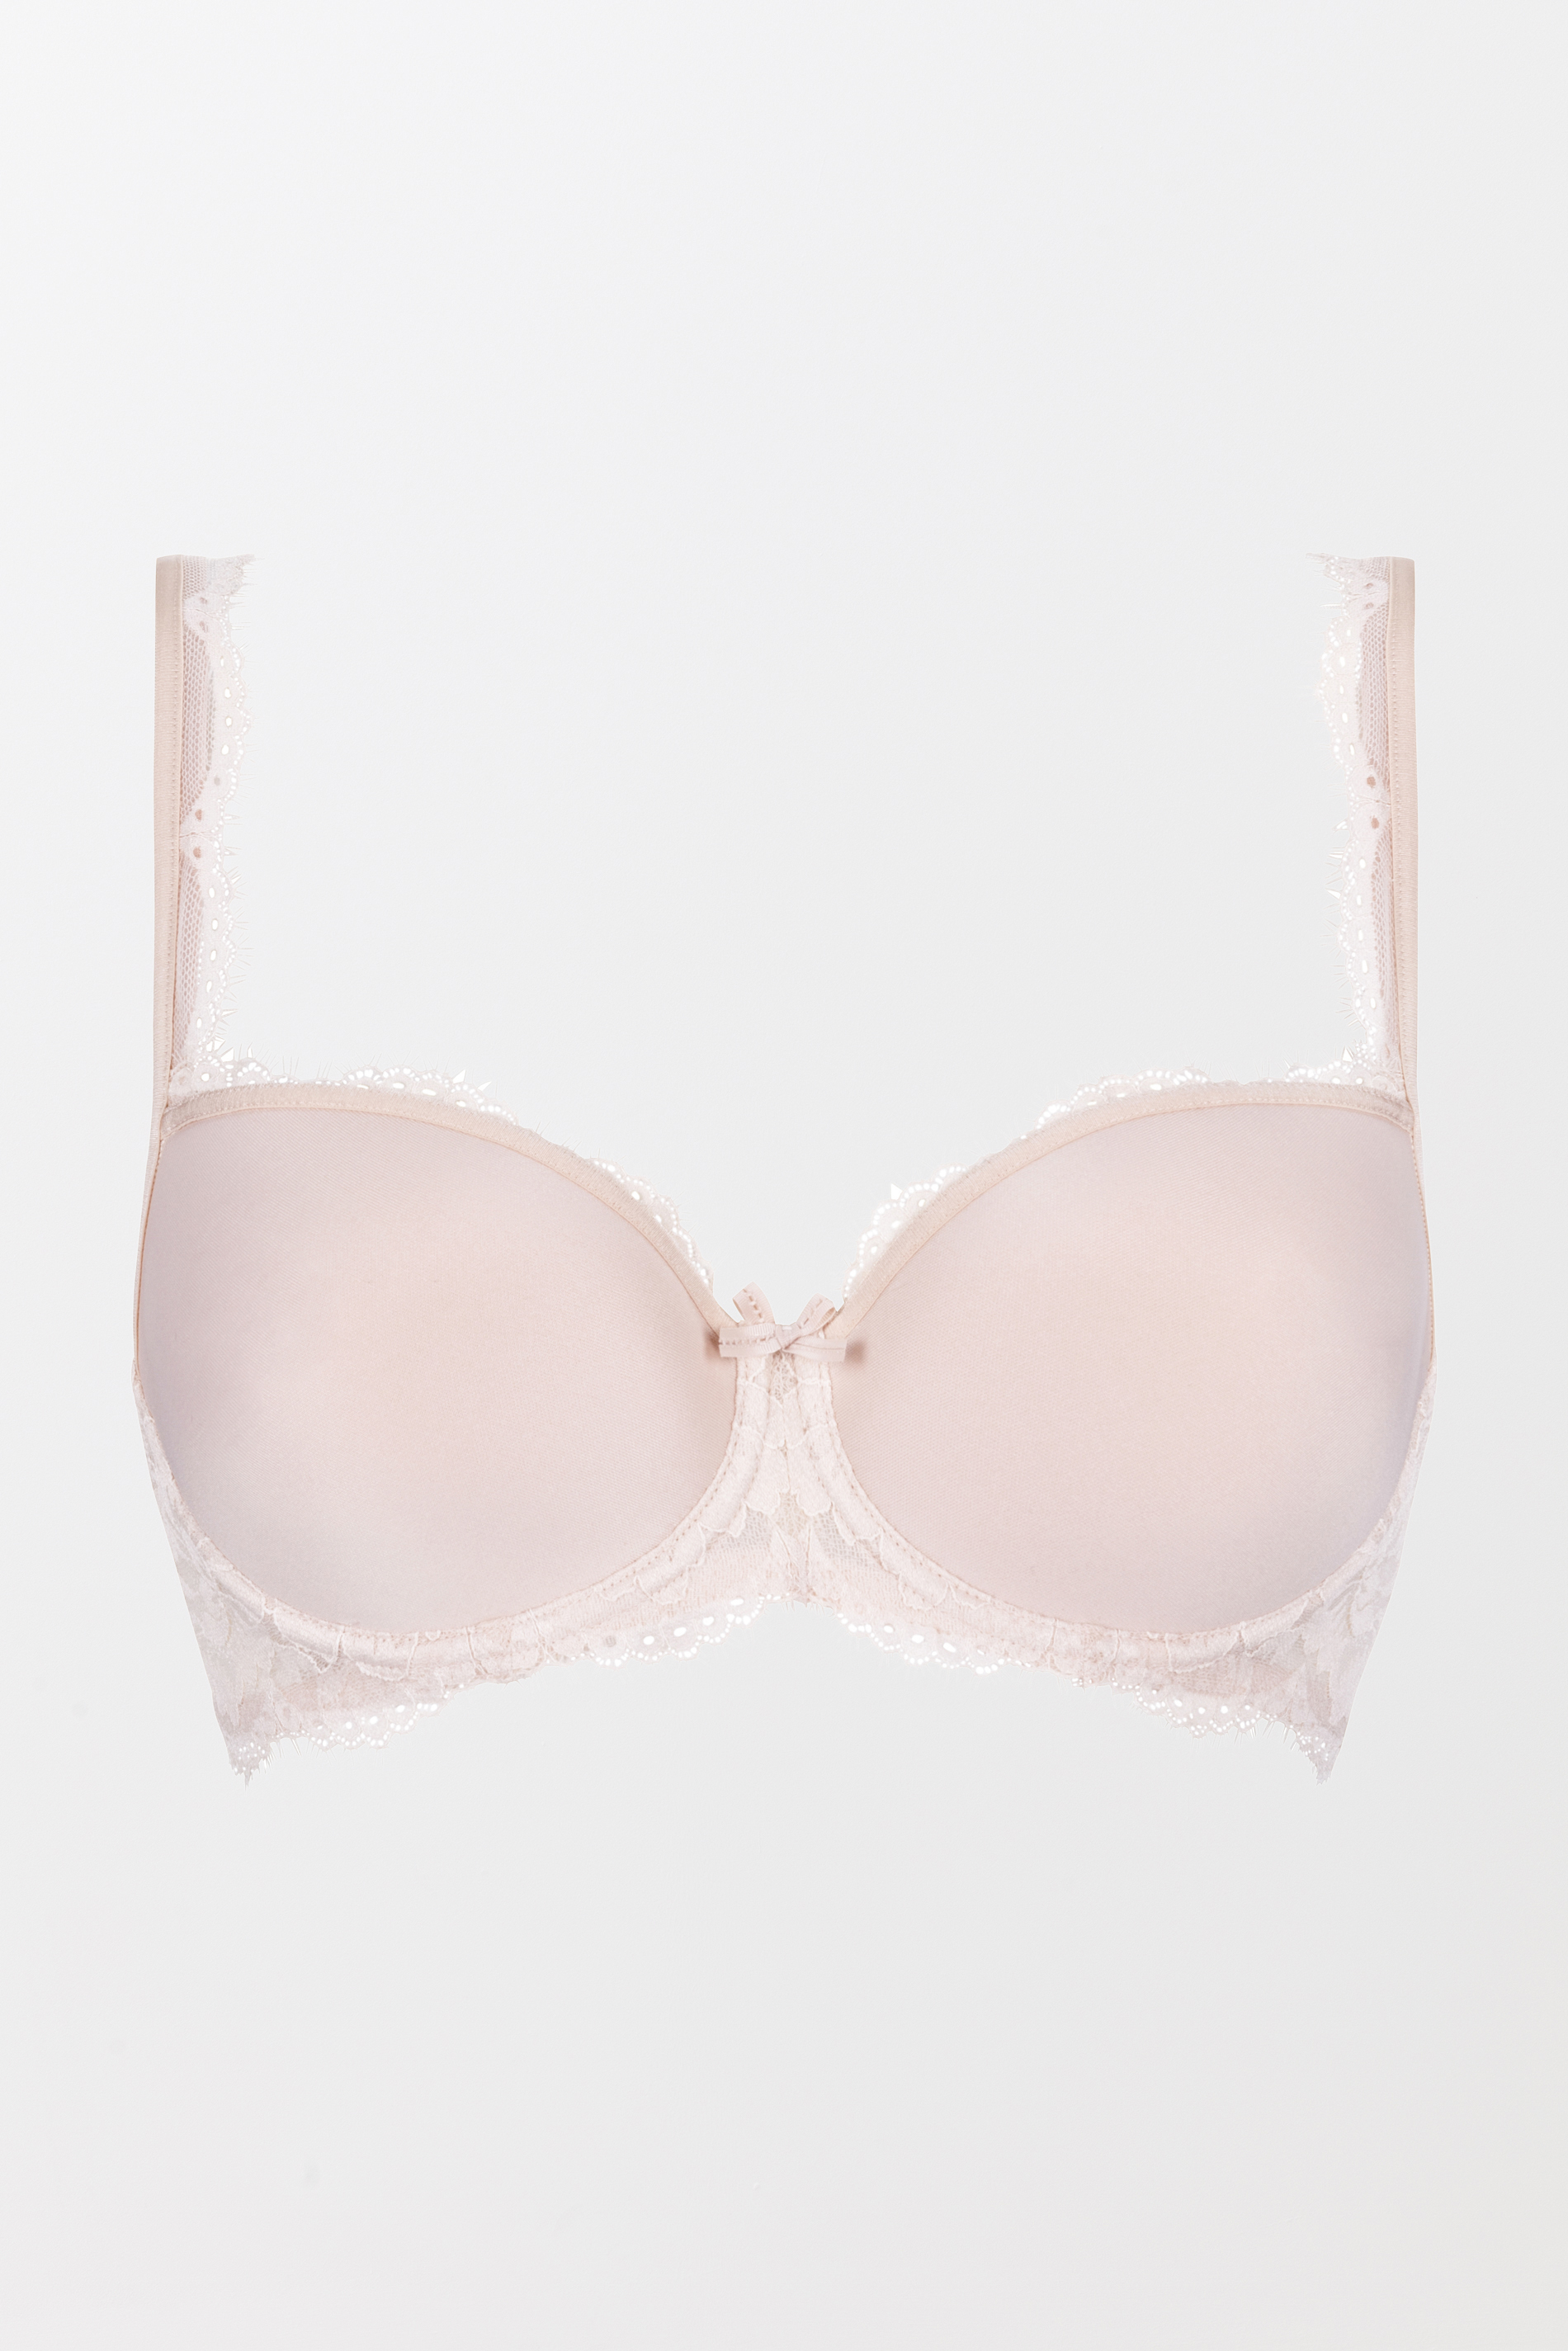 Spacer bra | Half Cup Blossom Serie Amazing Cut Out | mey®